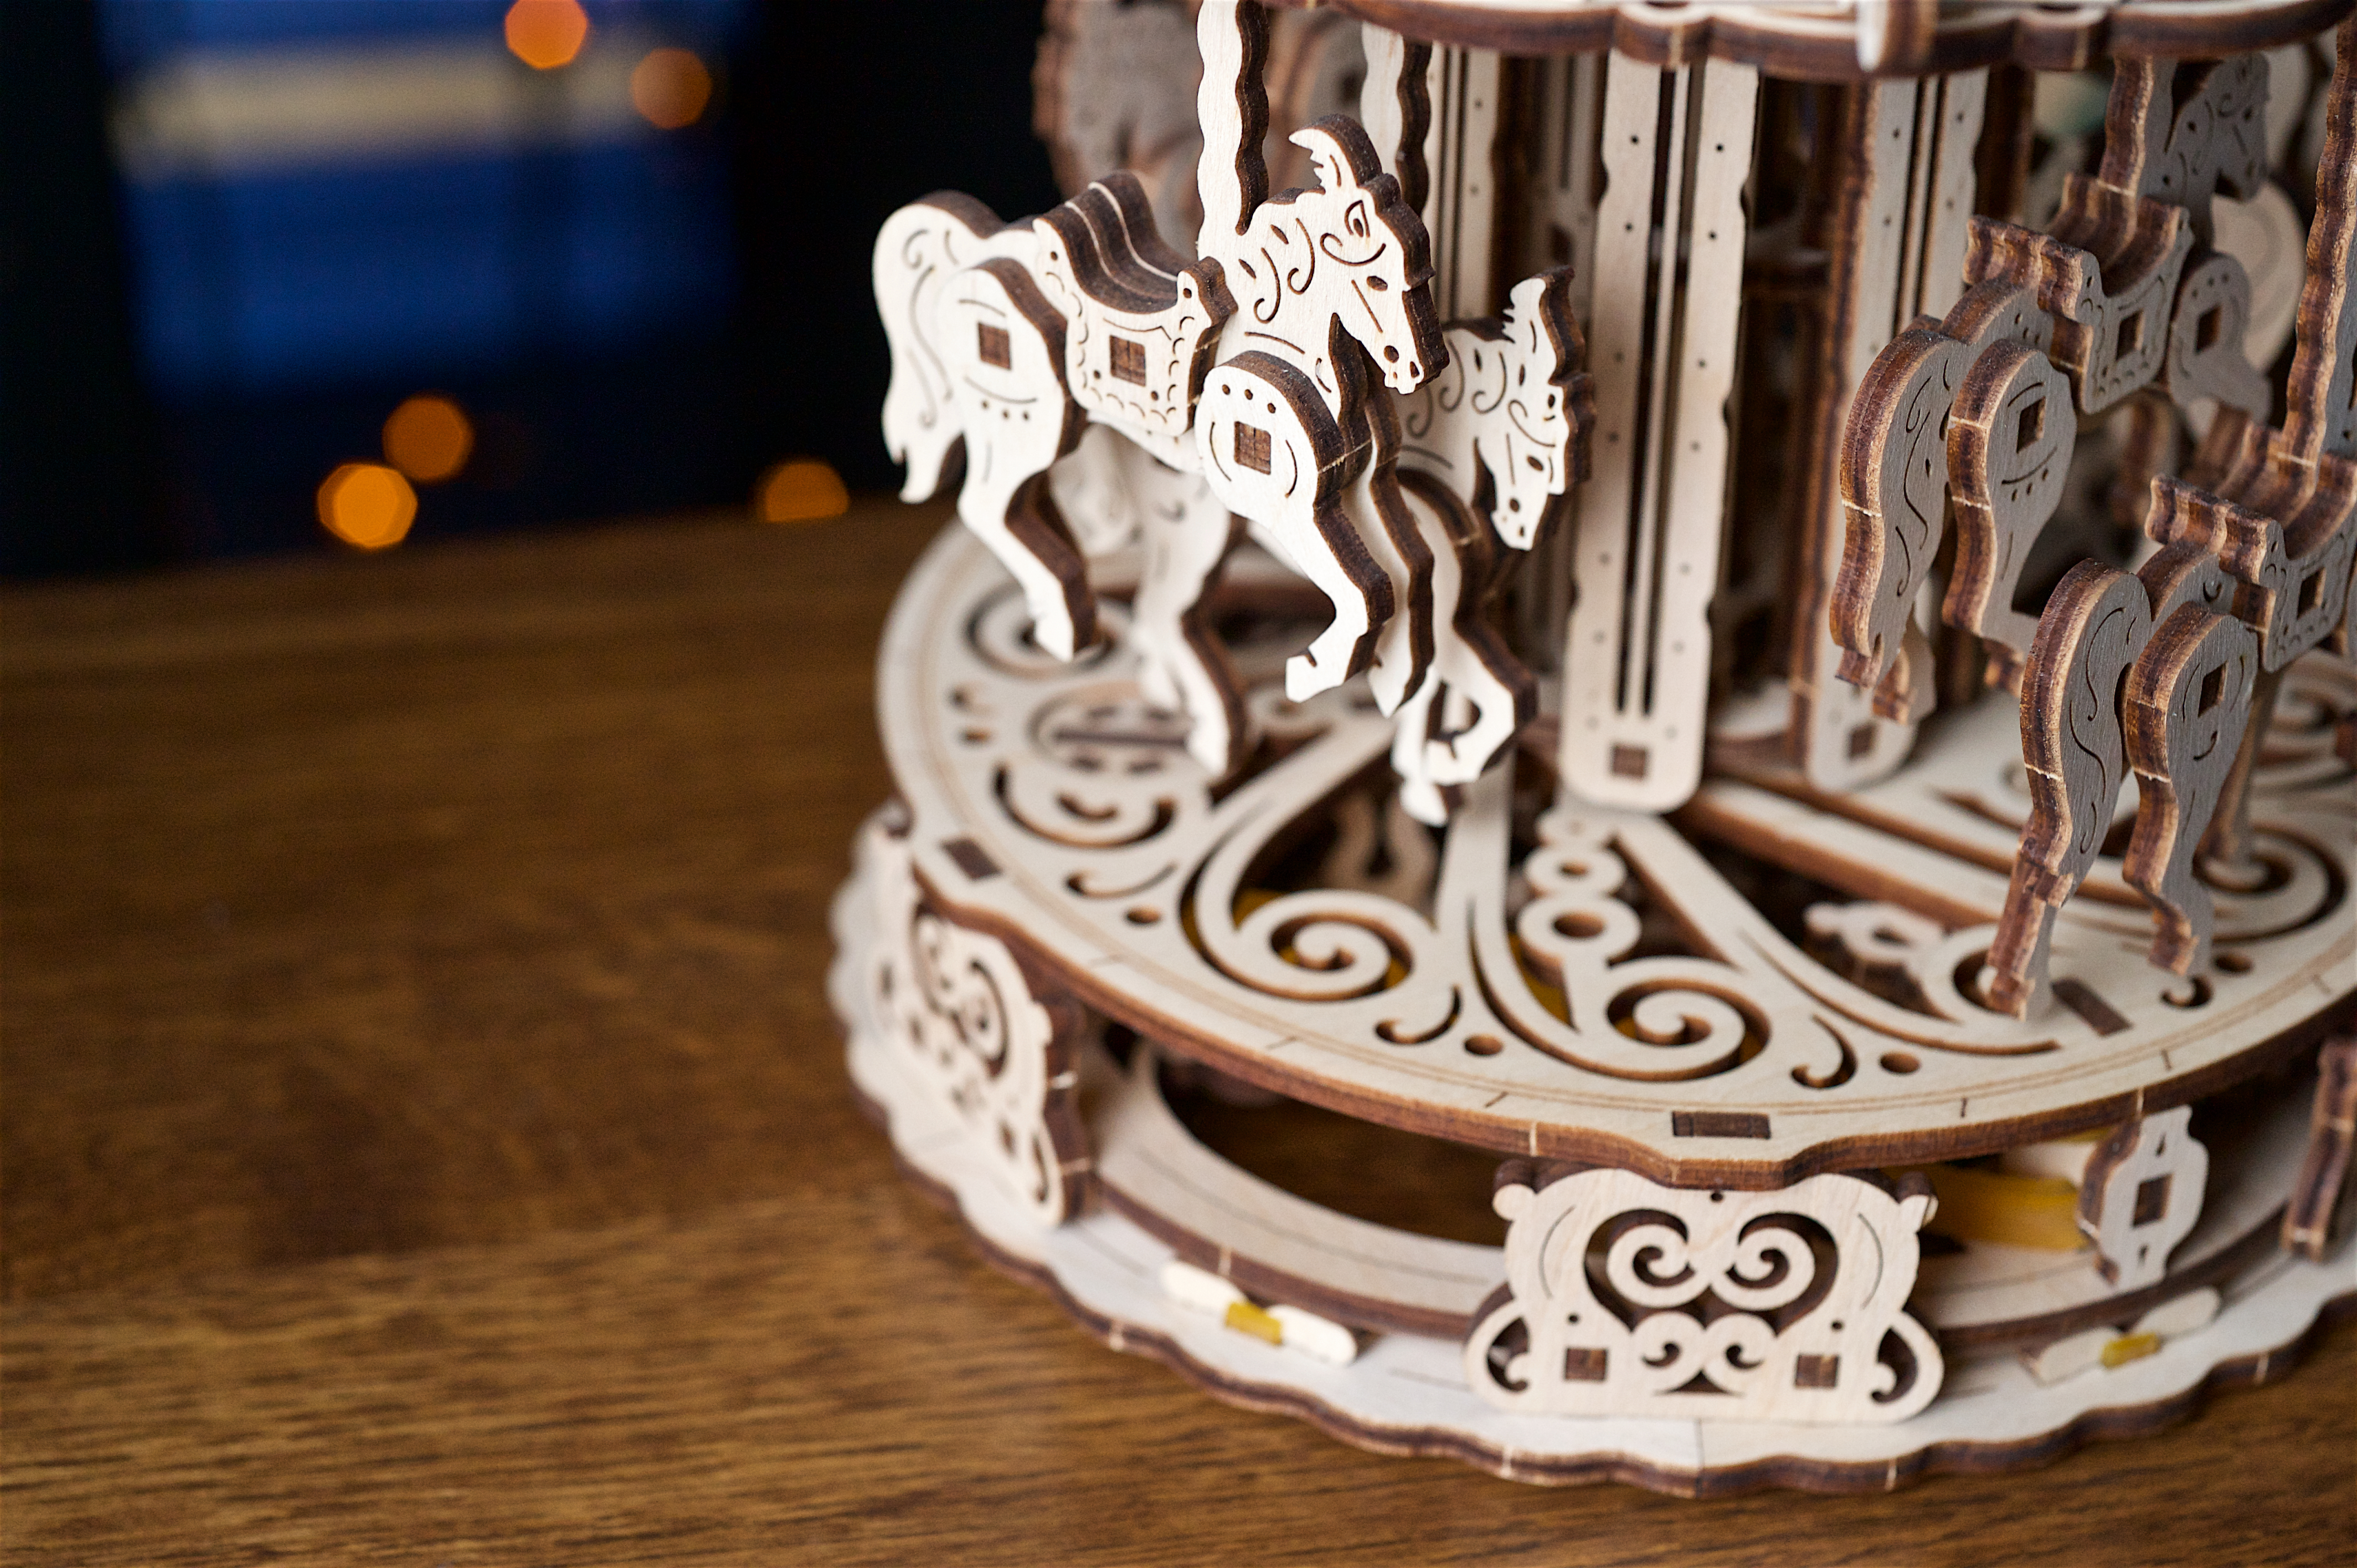 Puzzle 3D - Carusel / Carousel | Ugears - 1